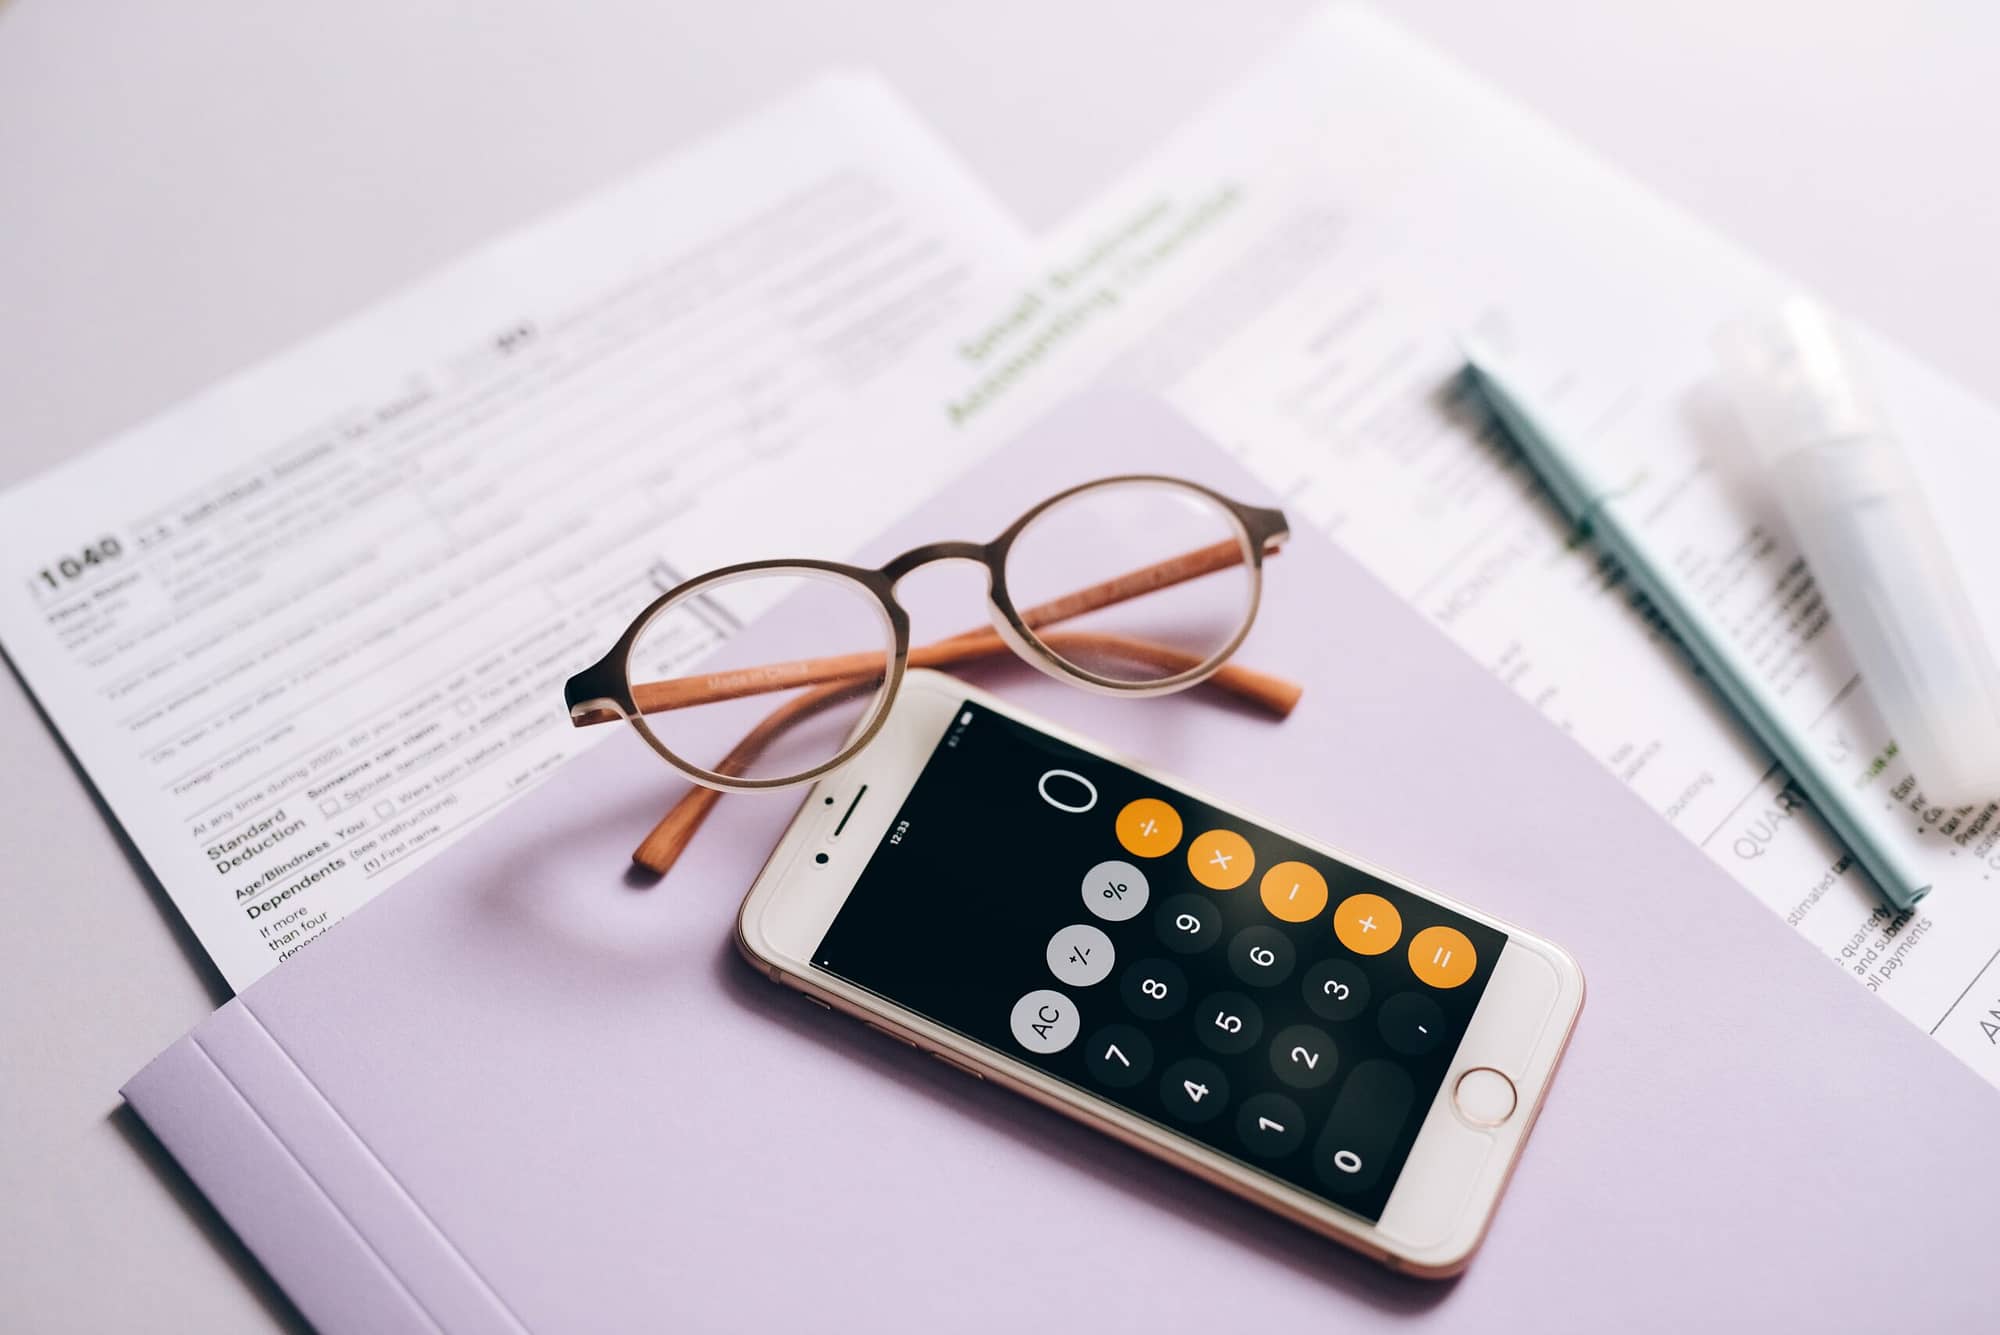 Top Accounting Apps for iPhone and iPad - Simplify Your Finances Today